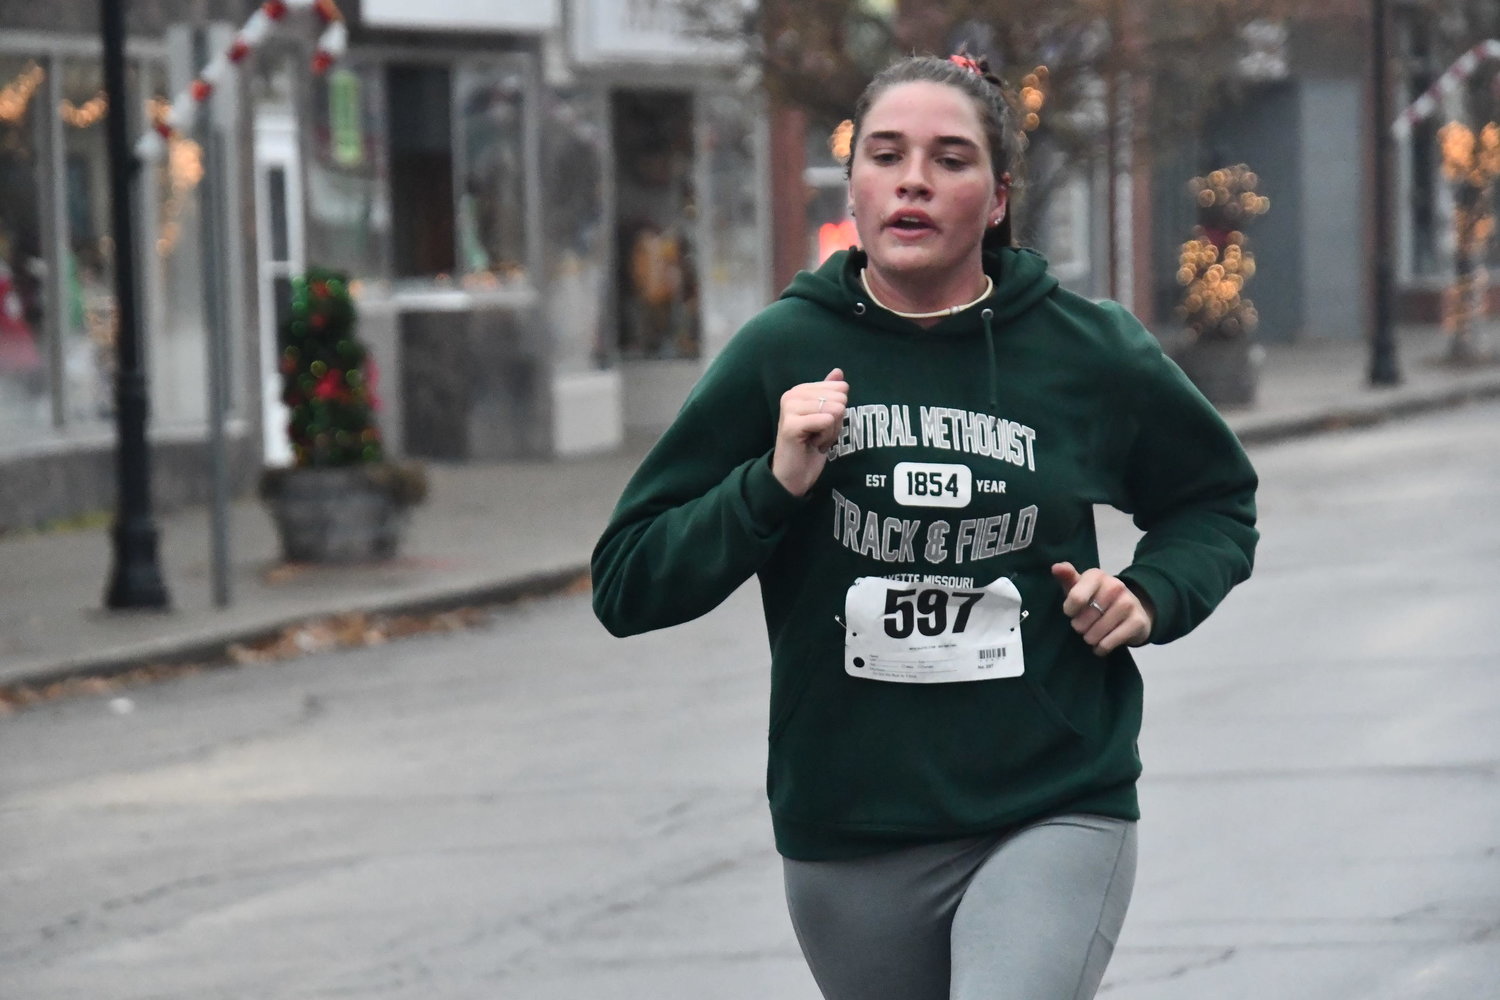 Isabella Ross, a member of the Central Methodist University women's cross country team, was the overall female winner of the Turkey Trot on Thursday, Nov. 24.